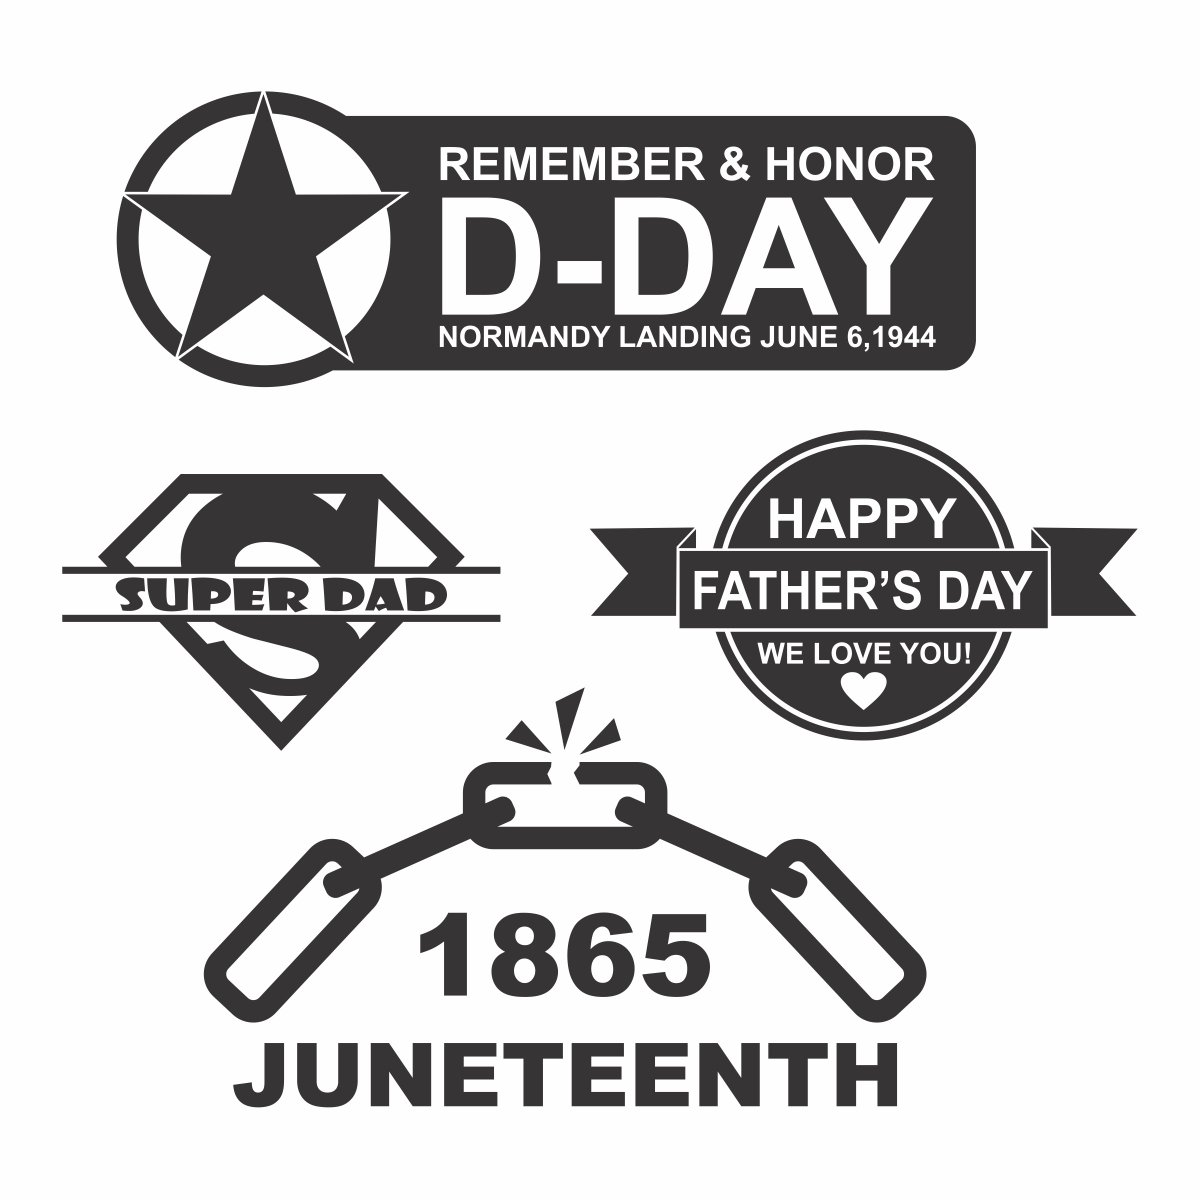 May free #clipart download #FathersDay, #SuperDad, #DDay & #Juneteenth #graphics.

visionengravers.com/support/vision…

#freegraphics #graphics #freeclipart #vectorart #engraving #cnc #cncrouter #engravingmachine #engraver #visionengravers #visionrouters #madewithvision #madeintheusa